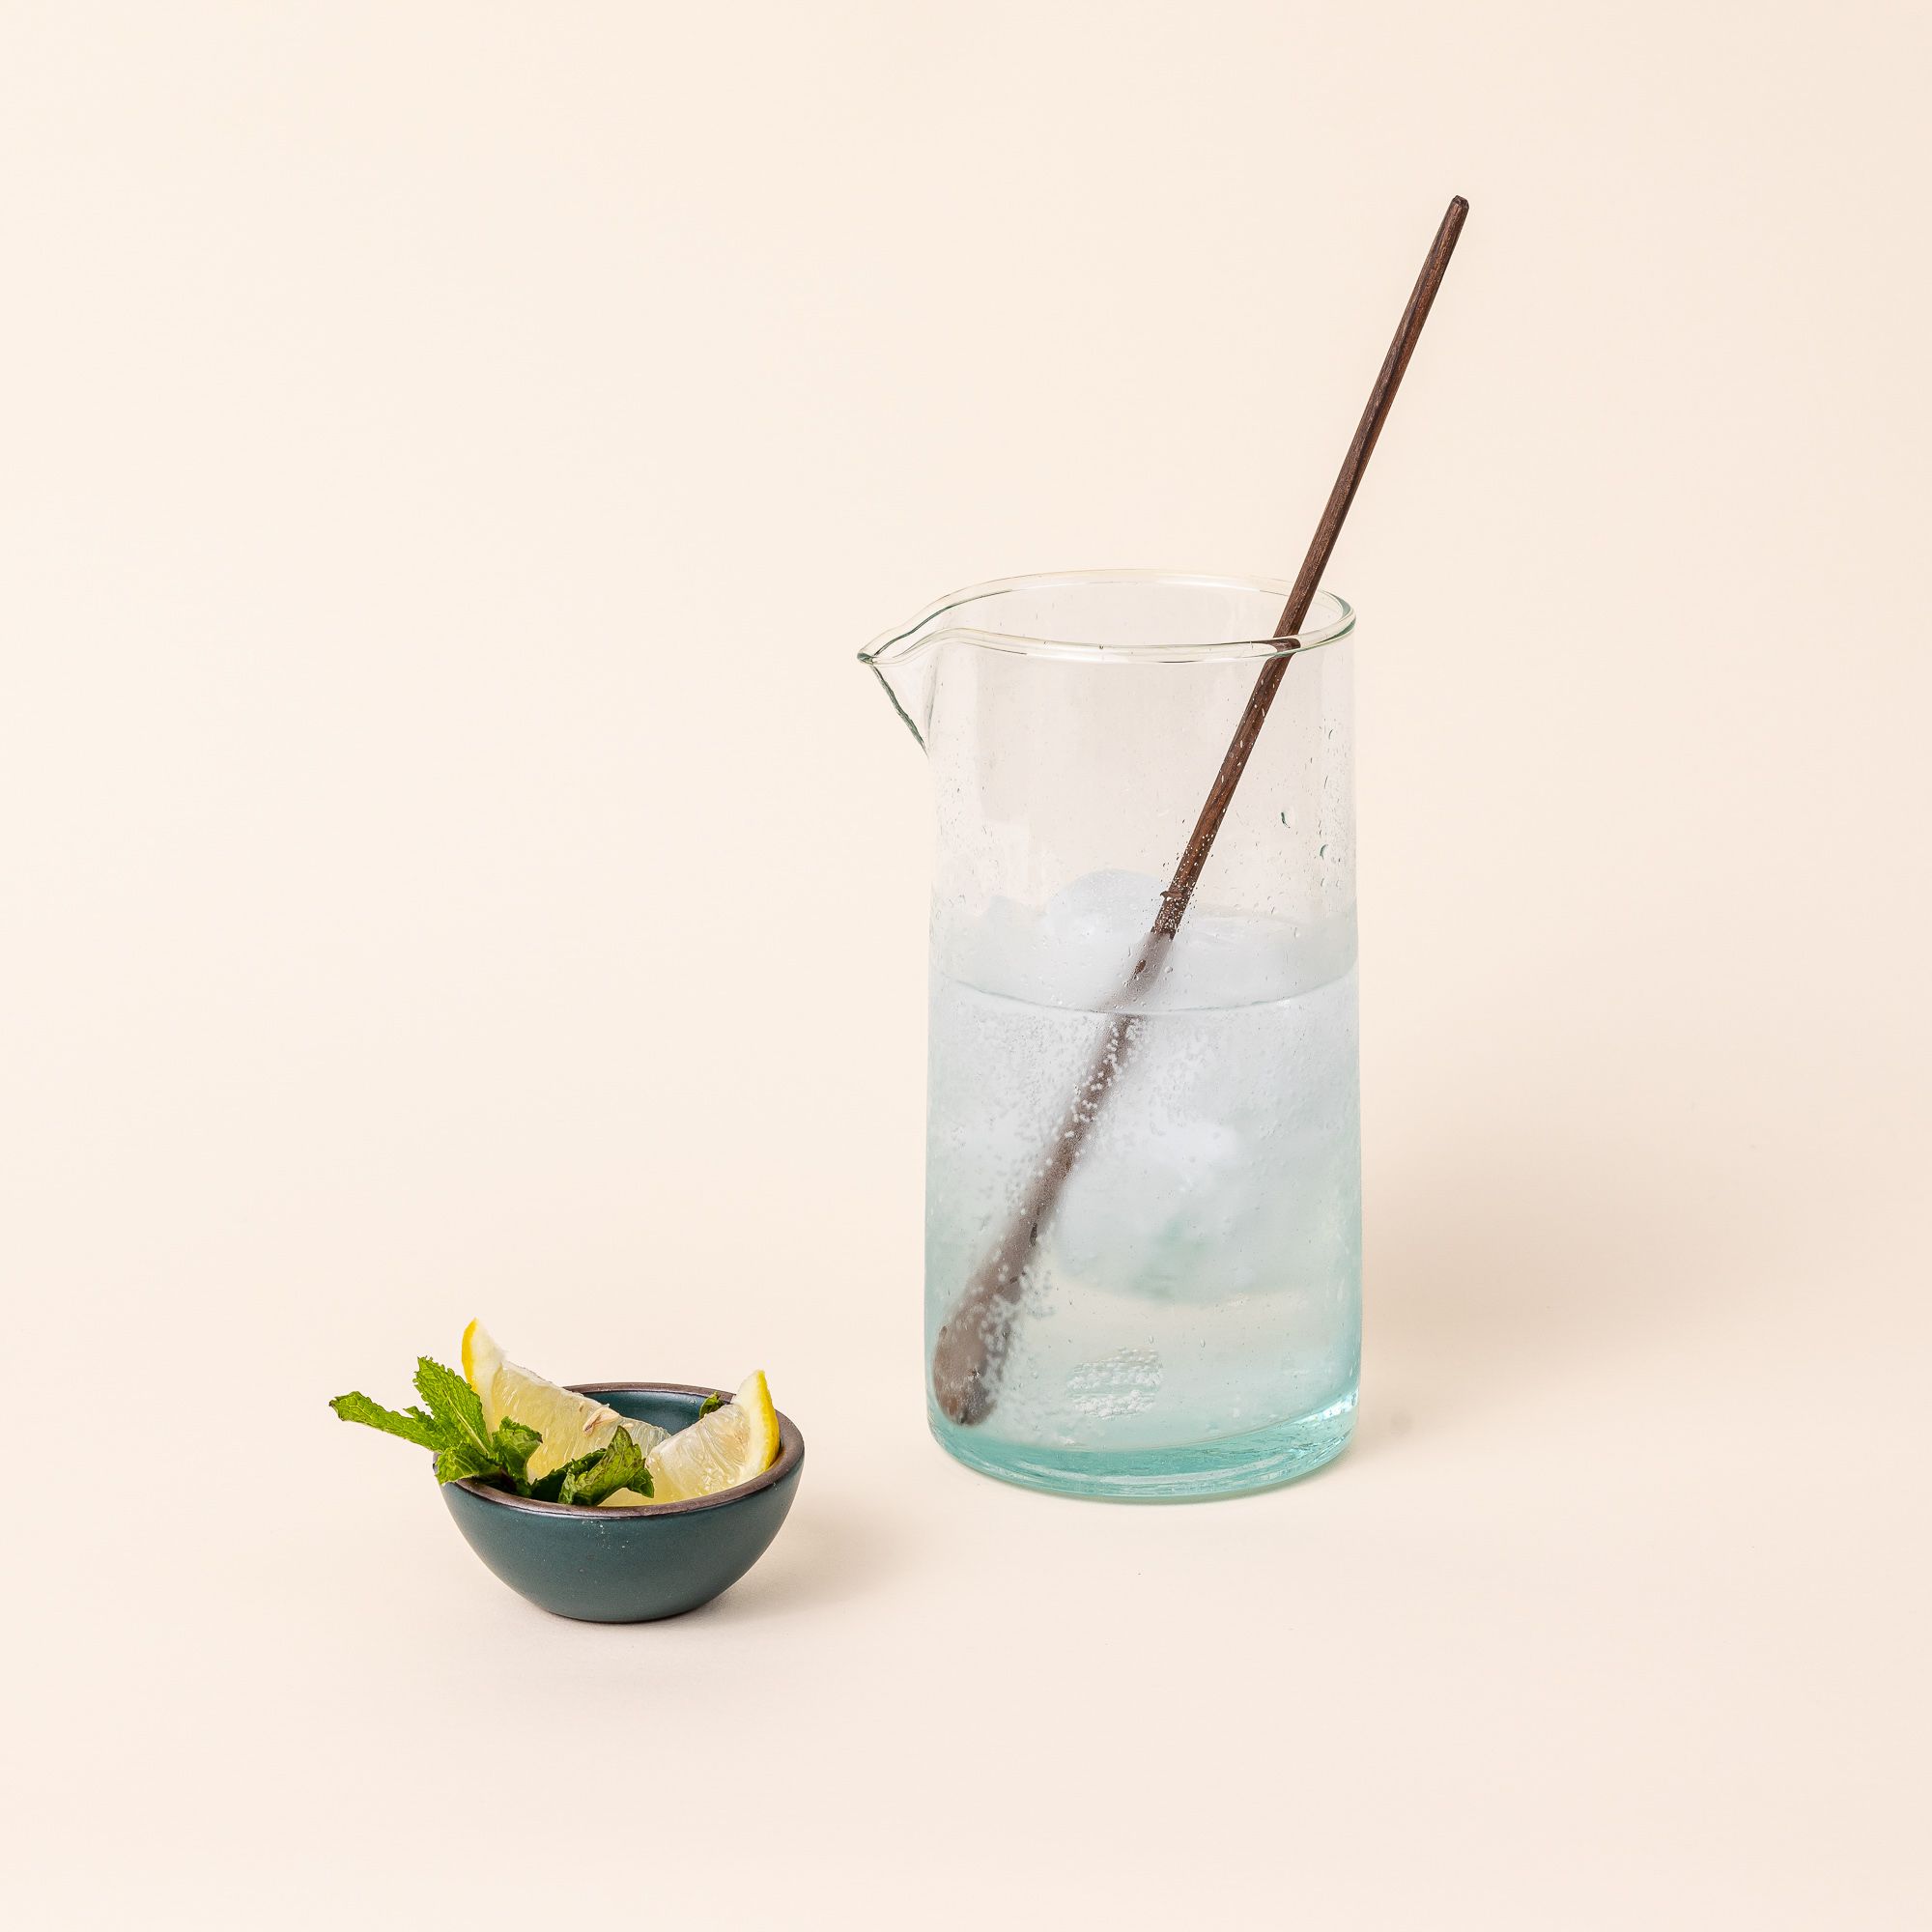 A long thin walnut cocktail stirrer with a small spoon-like shape on the end sits inside a wide clear pitcher filled with a clear liquid and ice. A tiny teal bowl sits next to it with sliced lemon and mint.